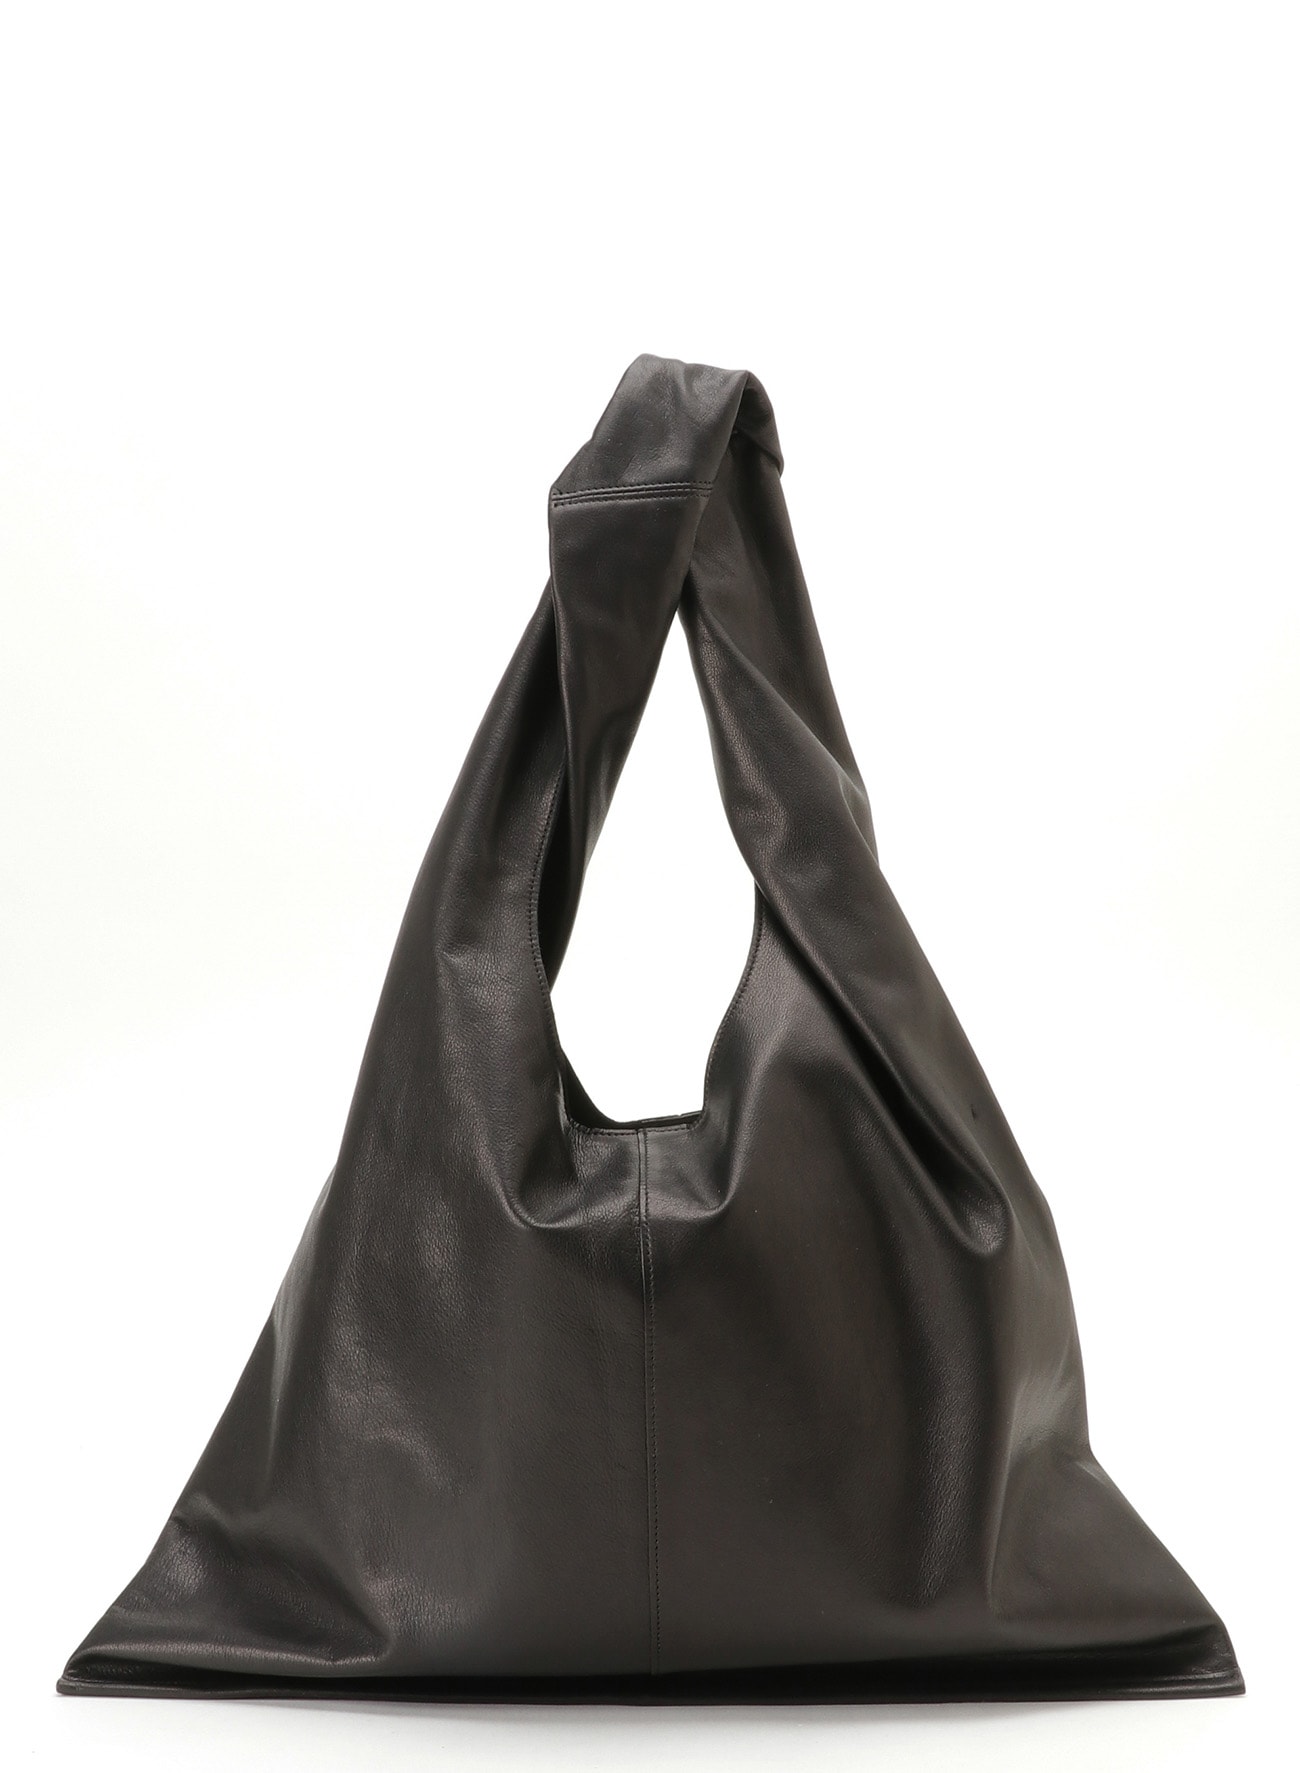 SOFT OIL LEATHER TWISTED TOTE L